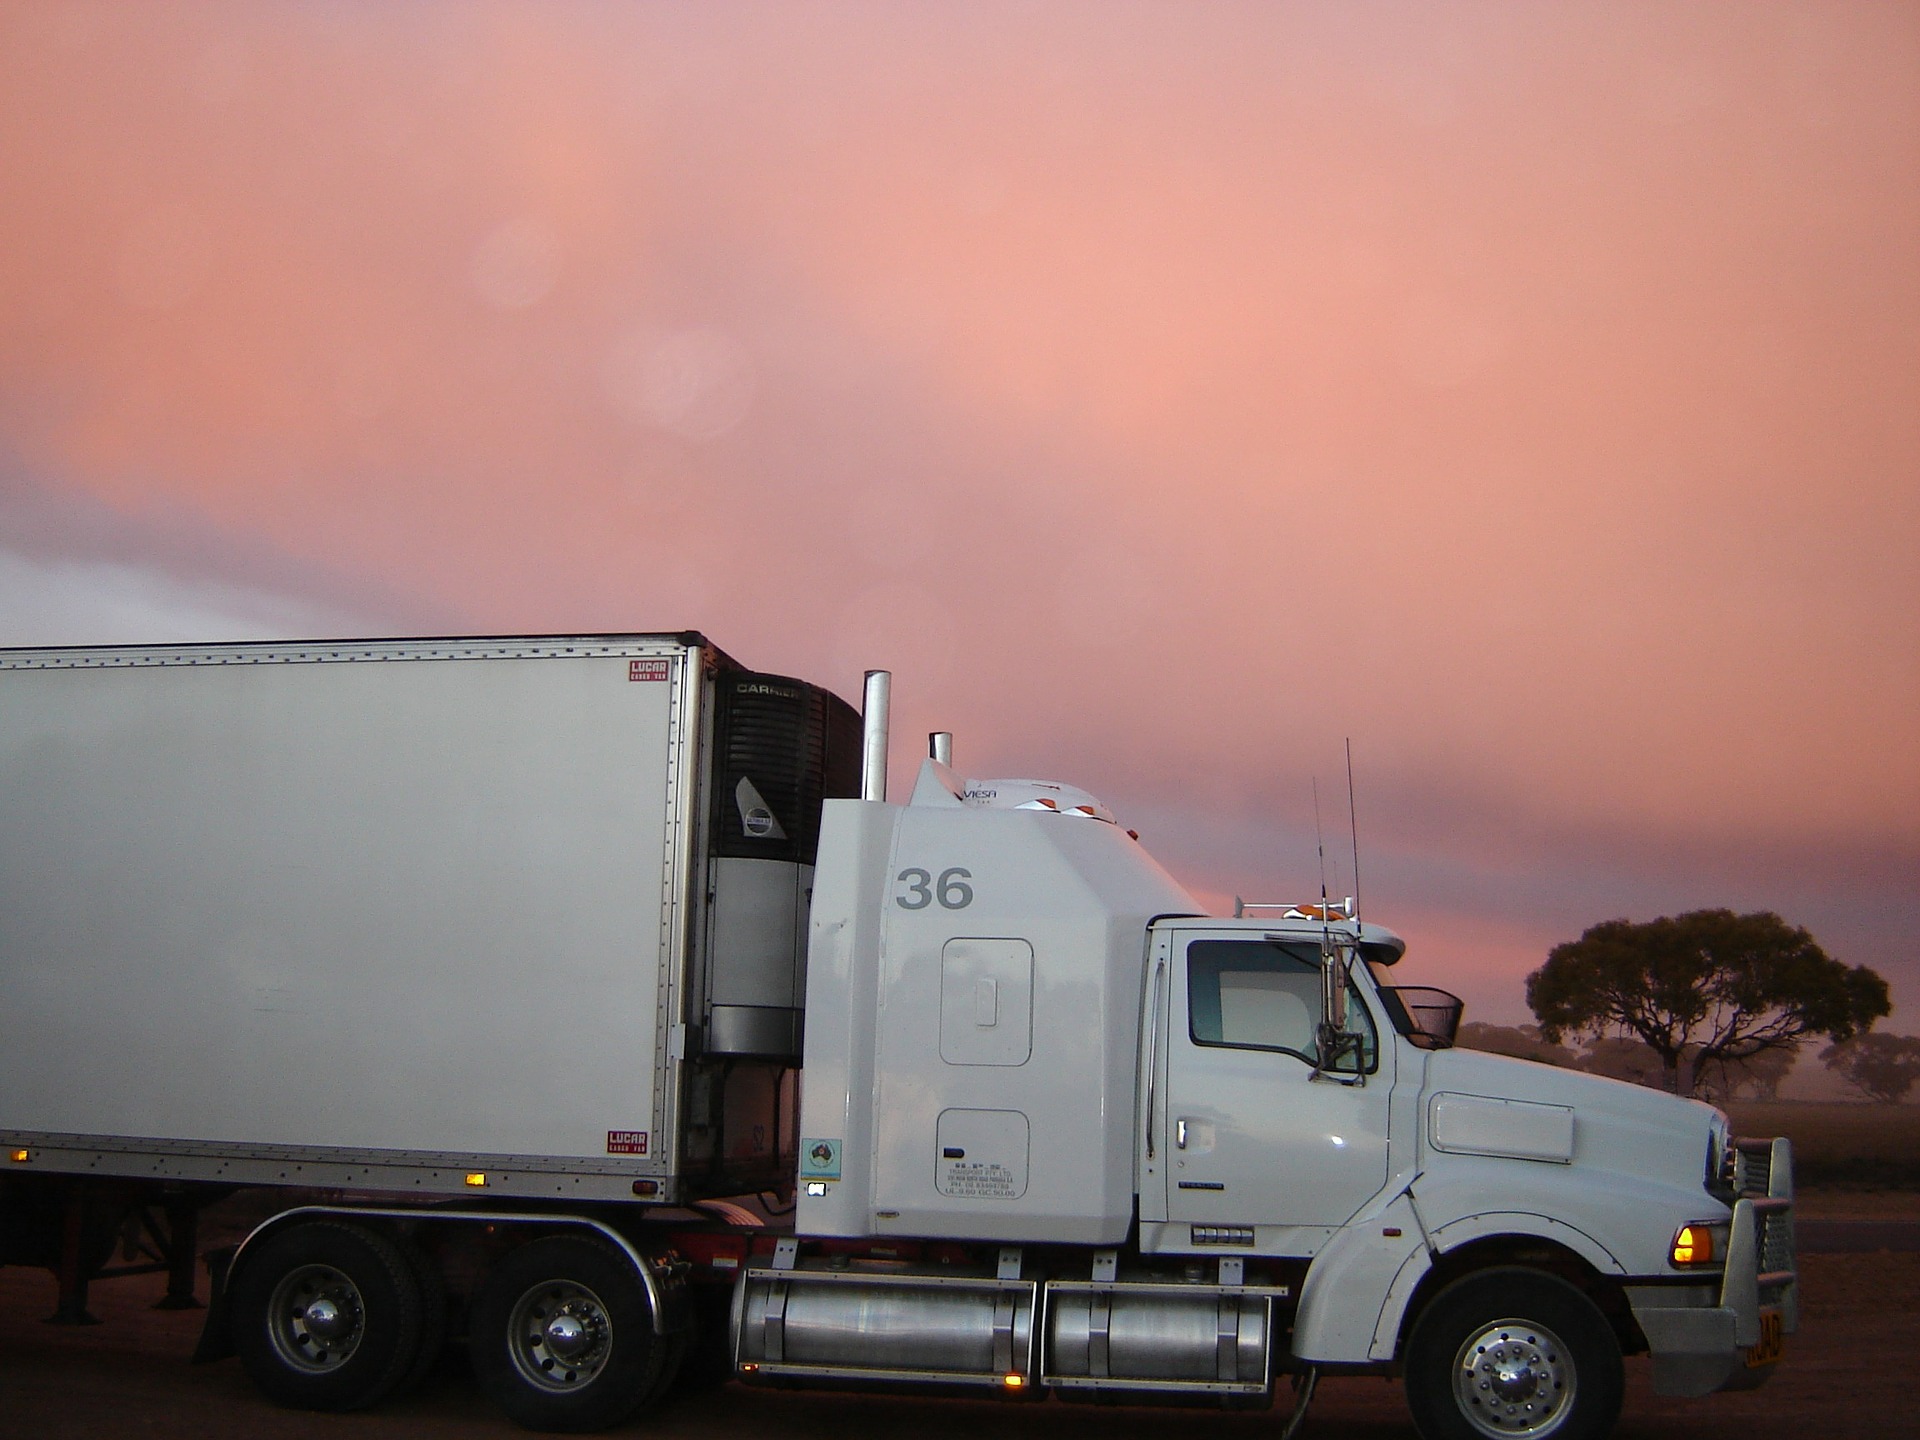 Side view of truck in sunset